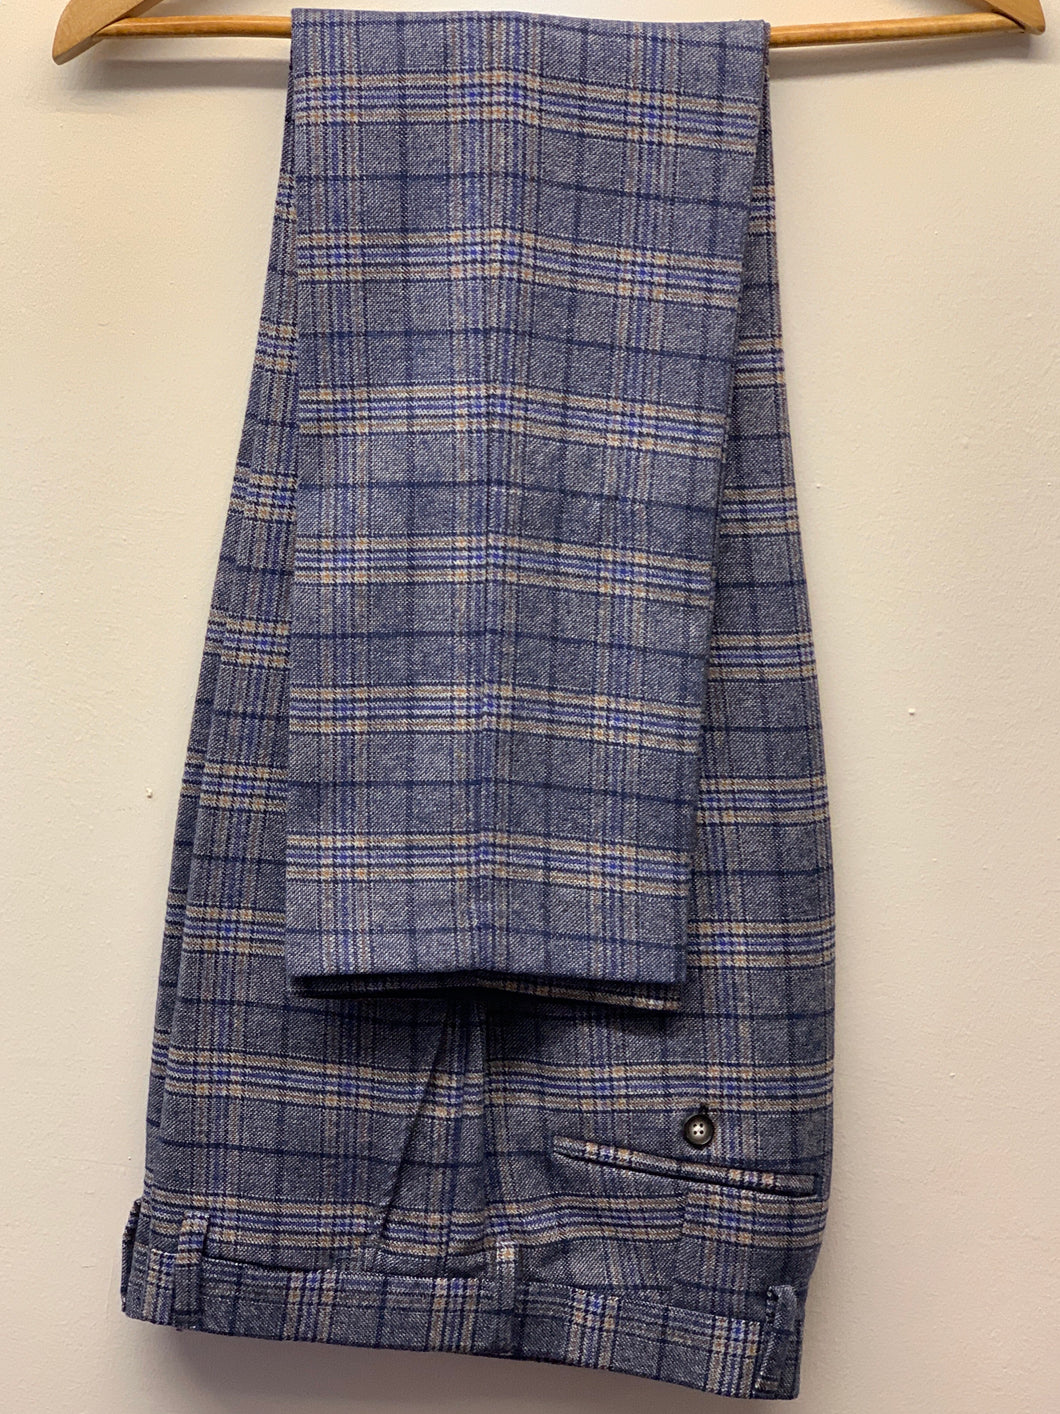 Robert Simon Marcello Blue Tweed Trousers hung up. Classic trousers for any business, formal occasion or wedding